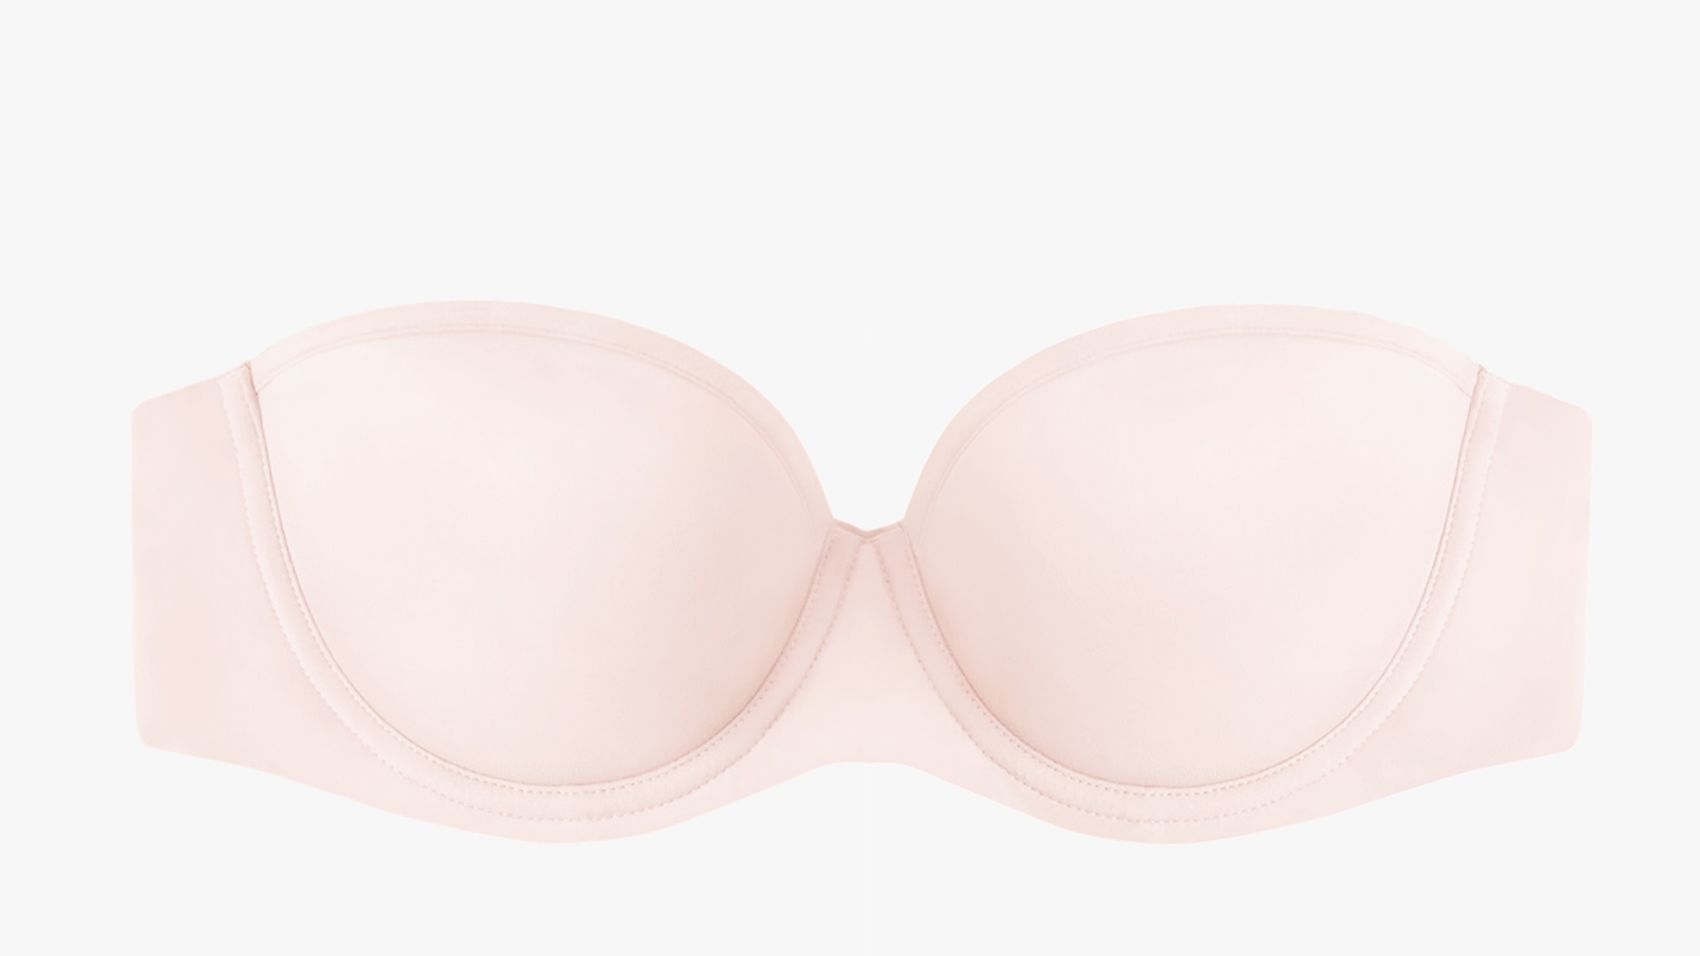 ThirdLove bra review: Is this the perfect bra? - Reviewed